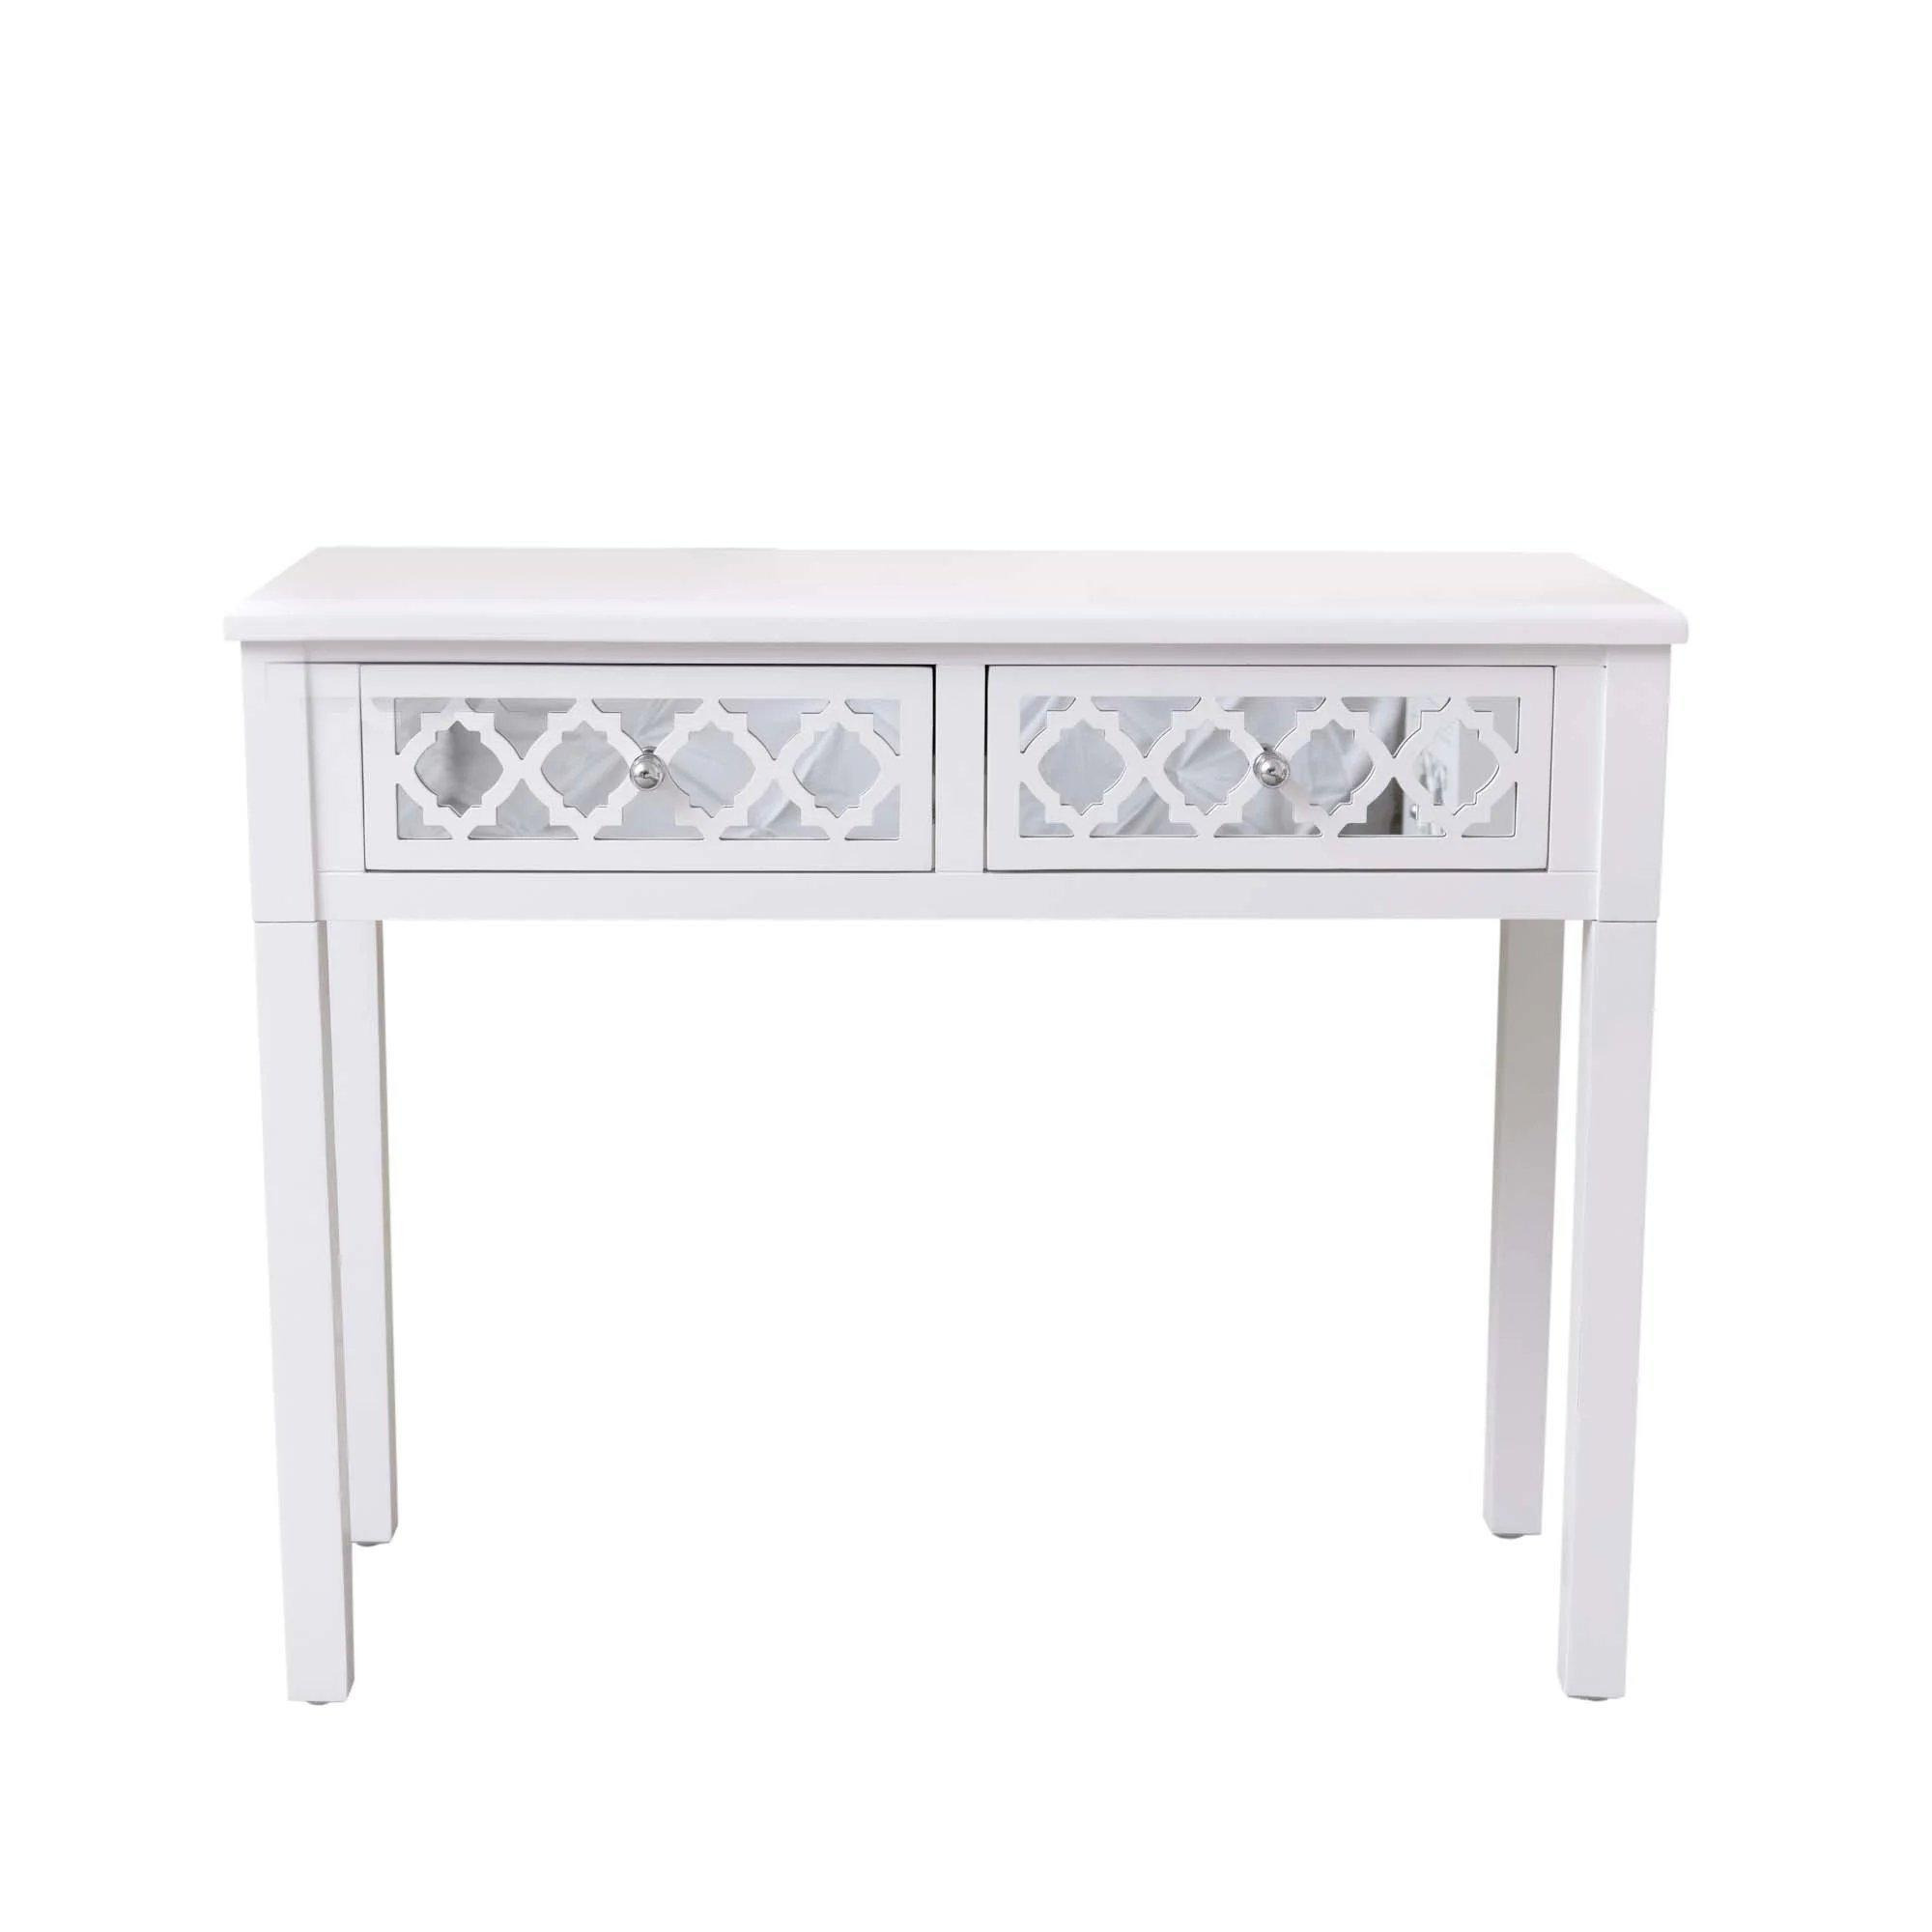 White Mirrored Console Table / Dressing Table - Sabrina White Range - image 1